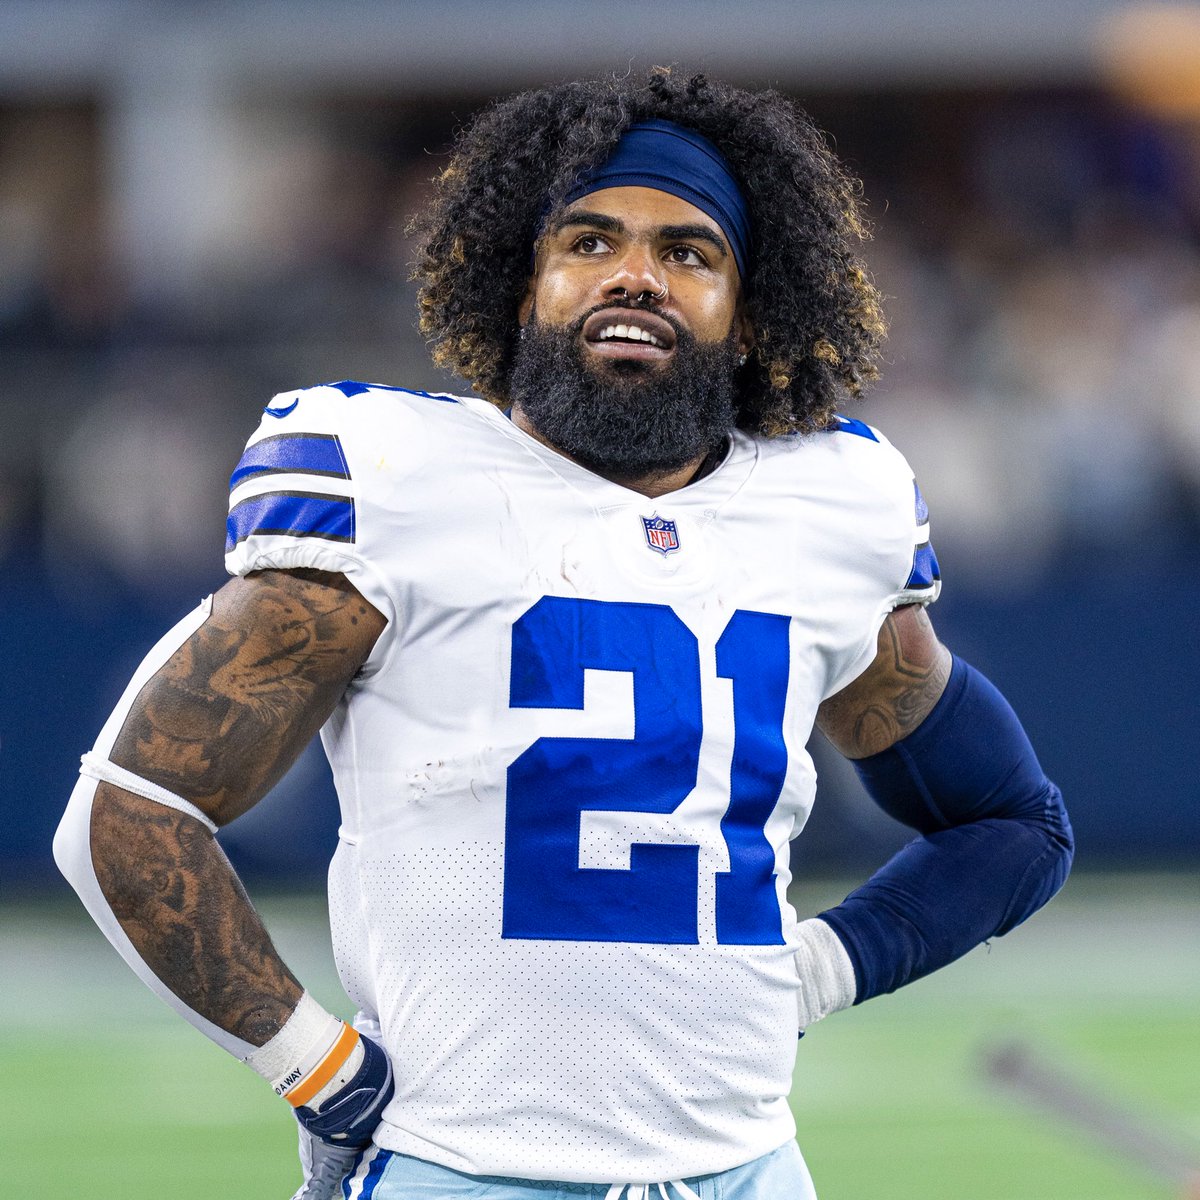 BREAKING: Ezekiel Elliott has agreed to terms and will be returning to Dallas pending a physical Per @RapSheet @TomPelissero